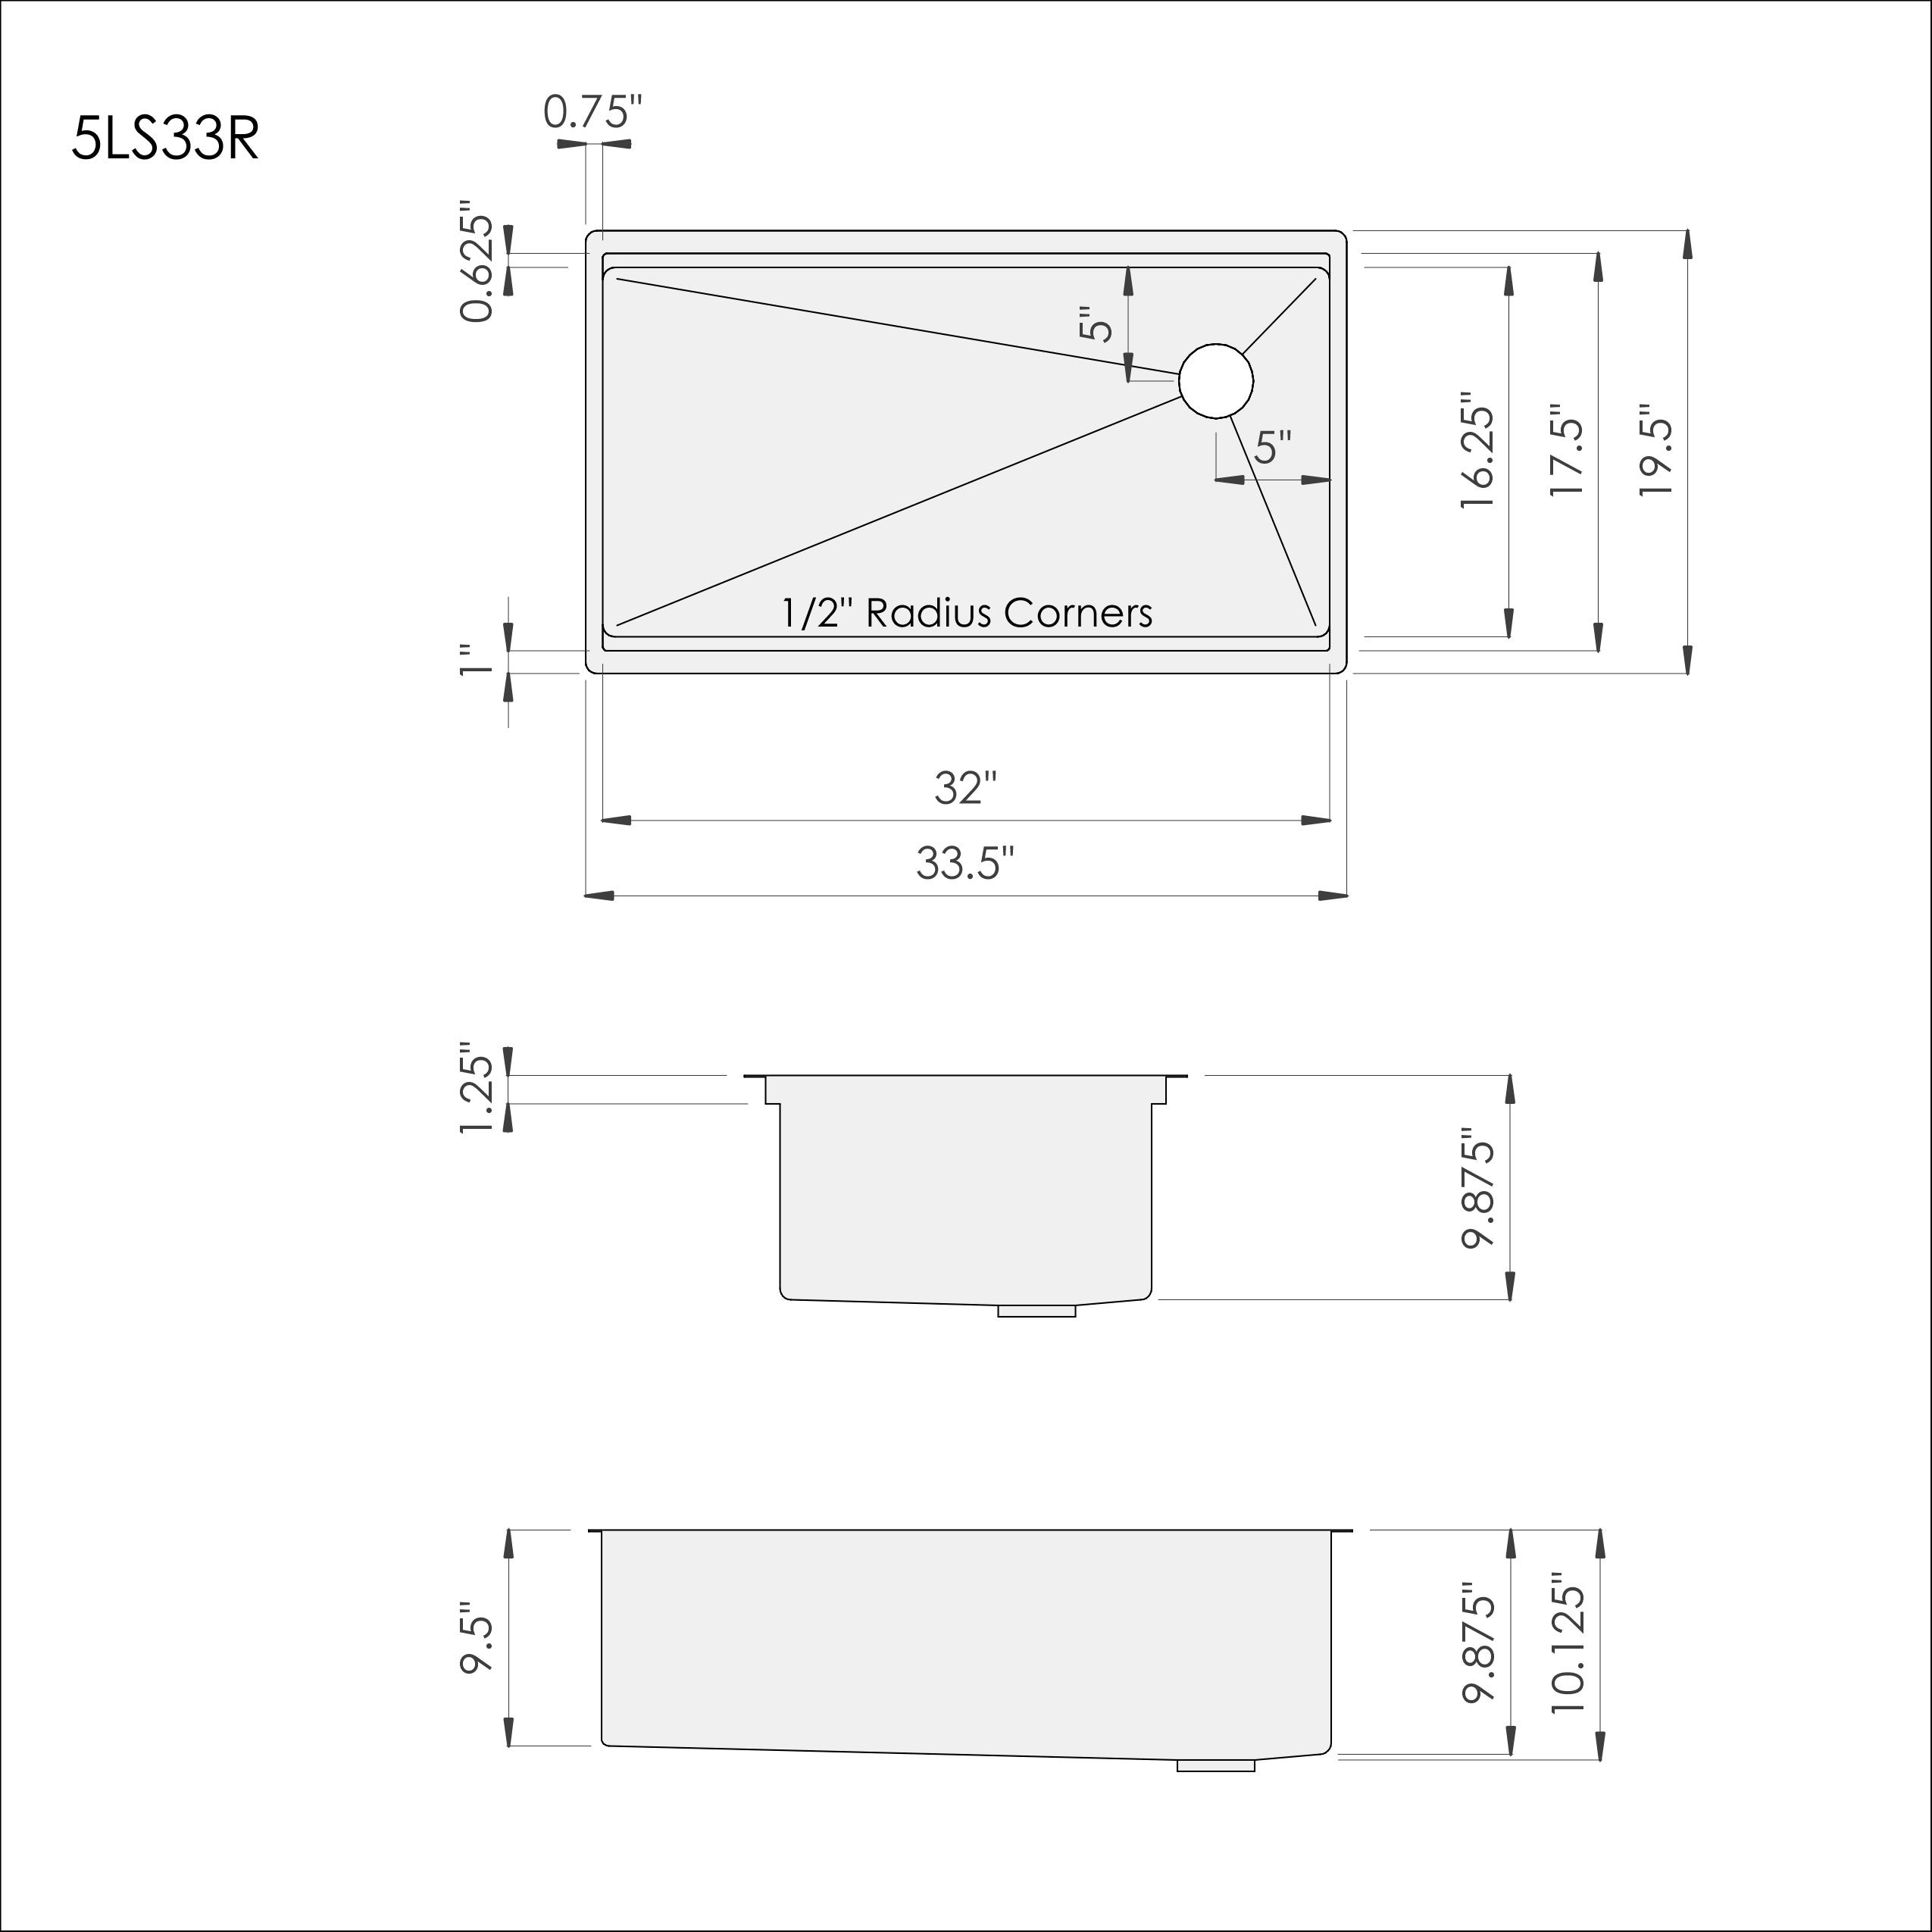 Dimensions of Create Good Sinks' 33 inch stainless steel undermount workstation sink with offset drain right. Patented seamless drain design. 5LS33R